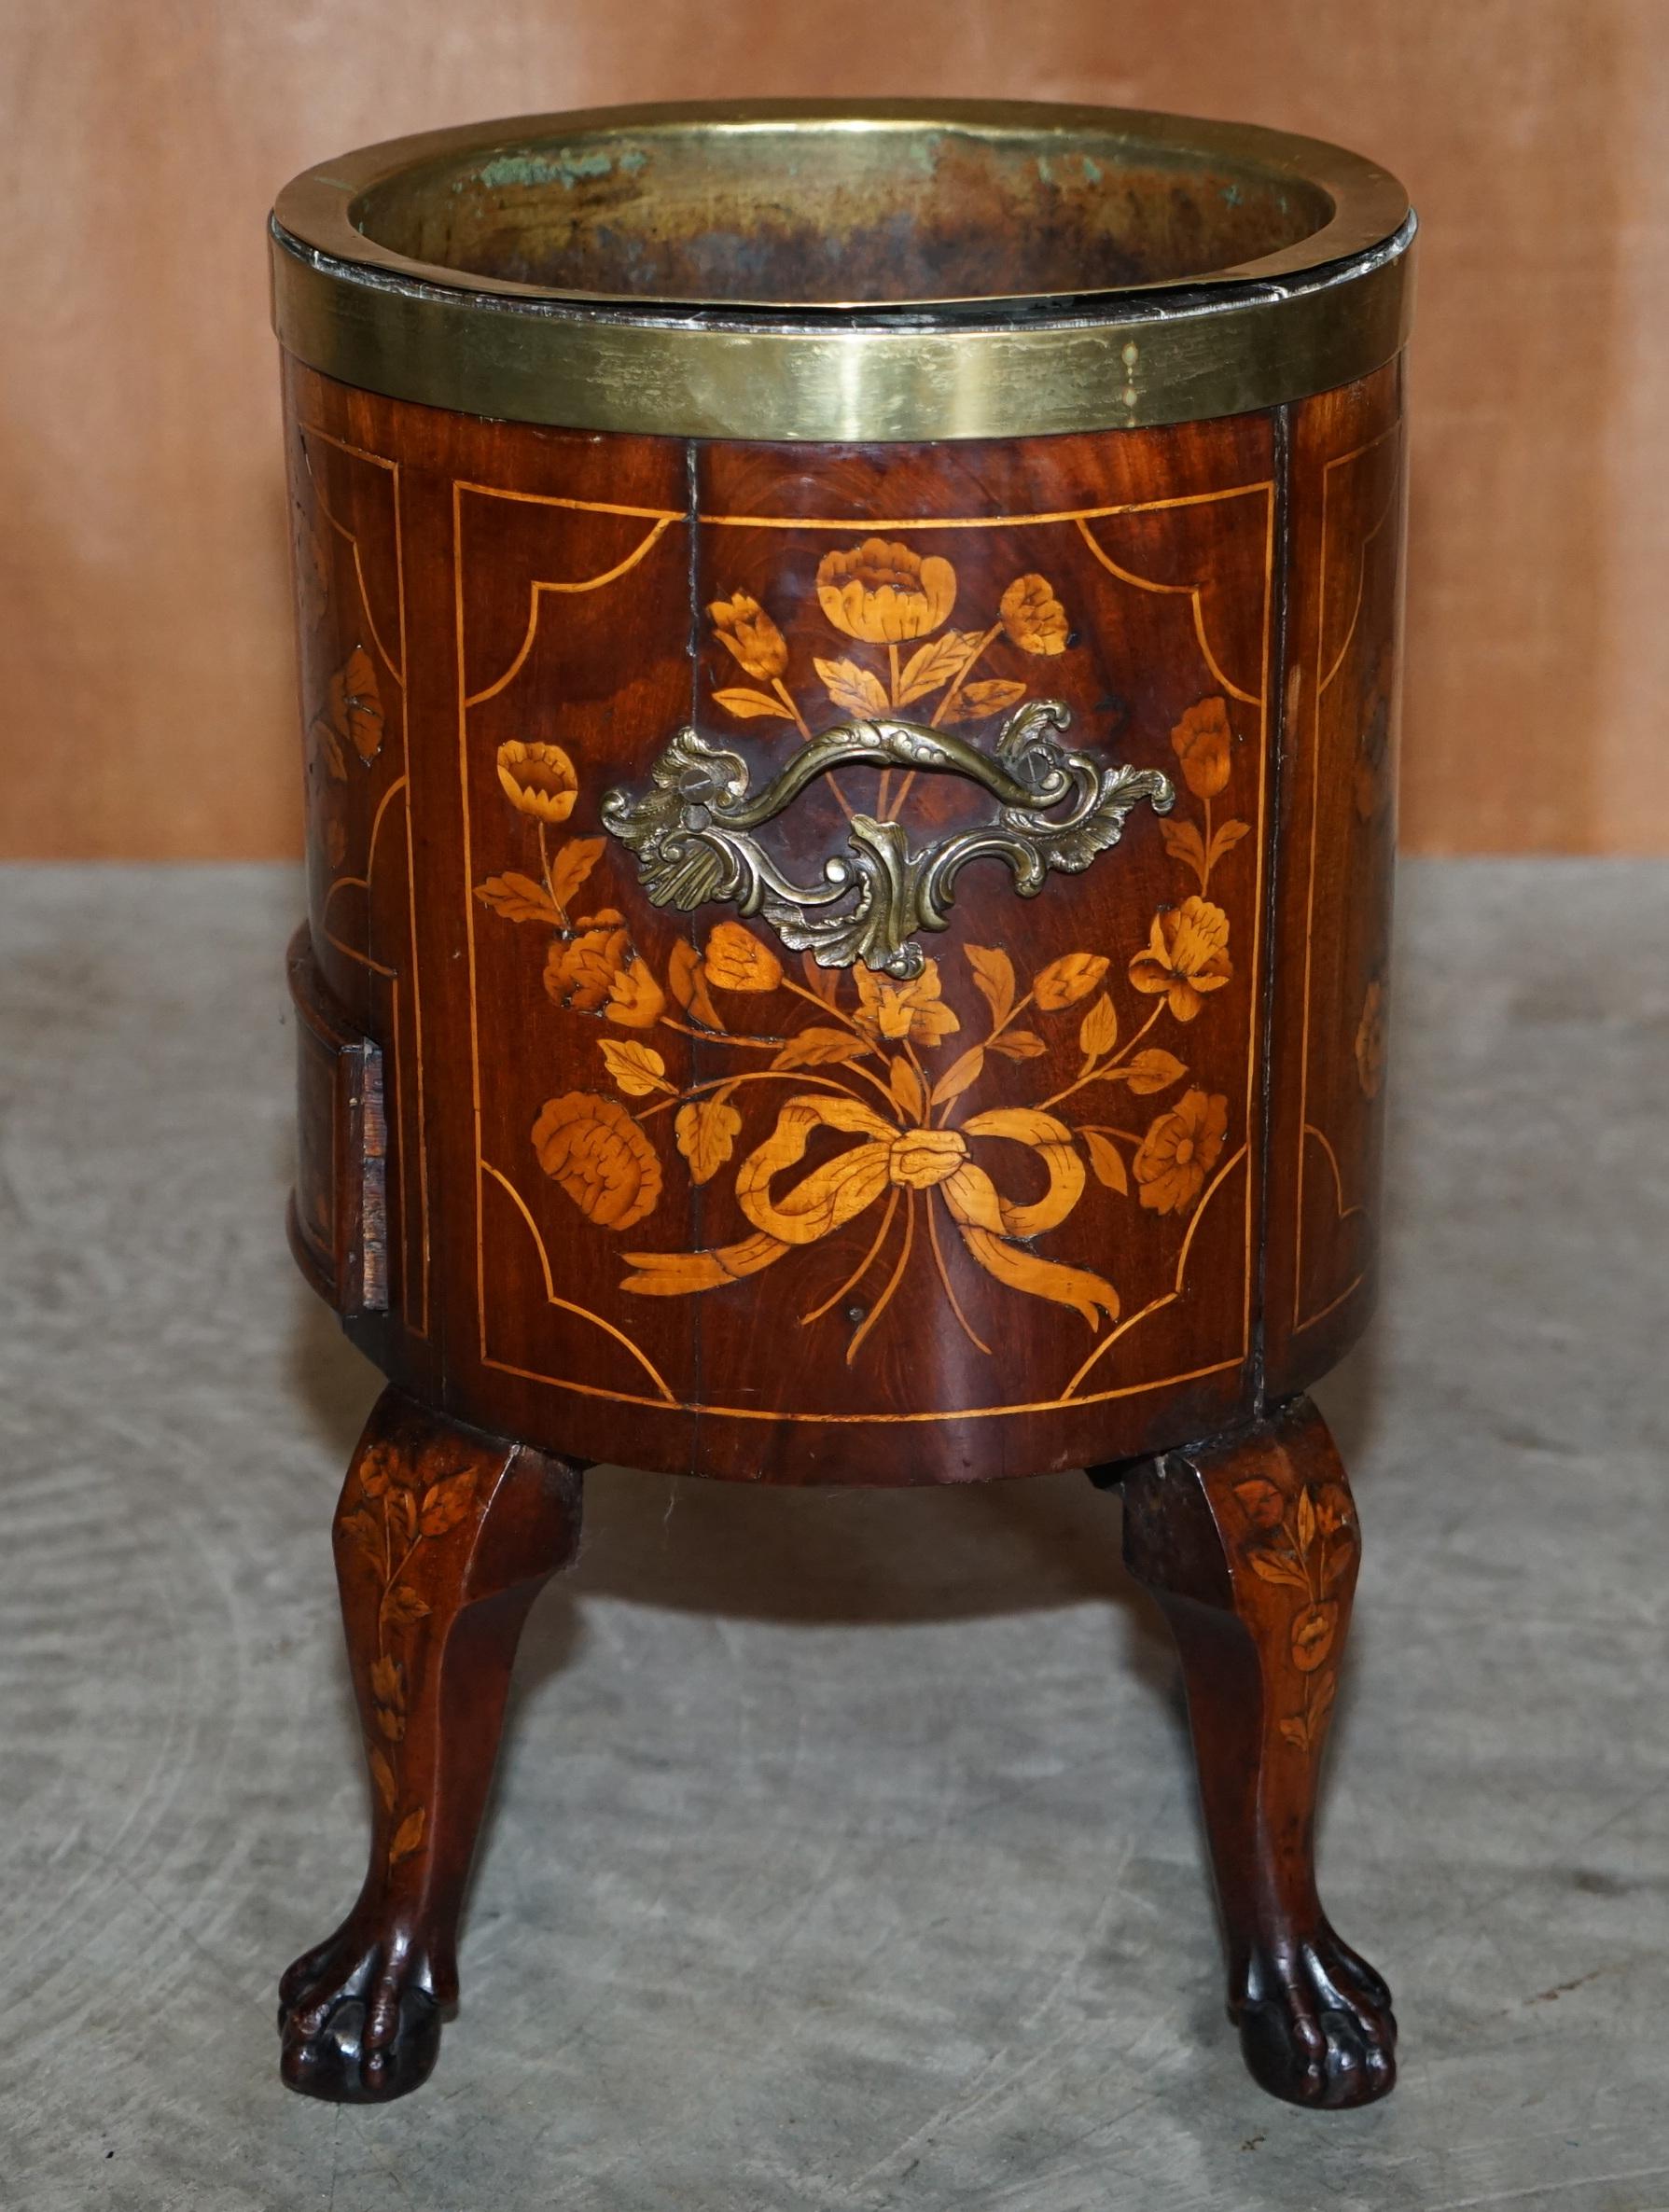 Exquisite Antique circa 1800 Dutch Inlaid Wine Cooler Bucket Claw & Ball Feet For Sale 1